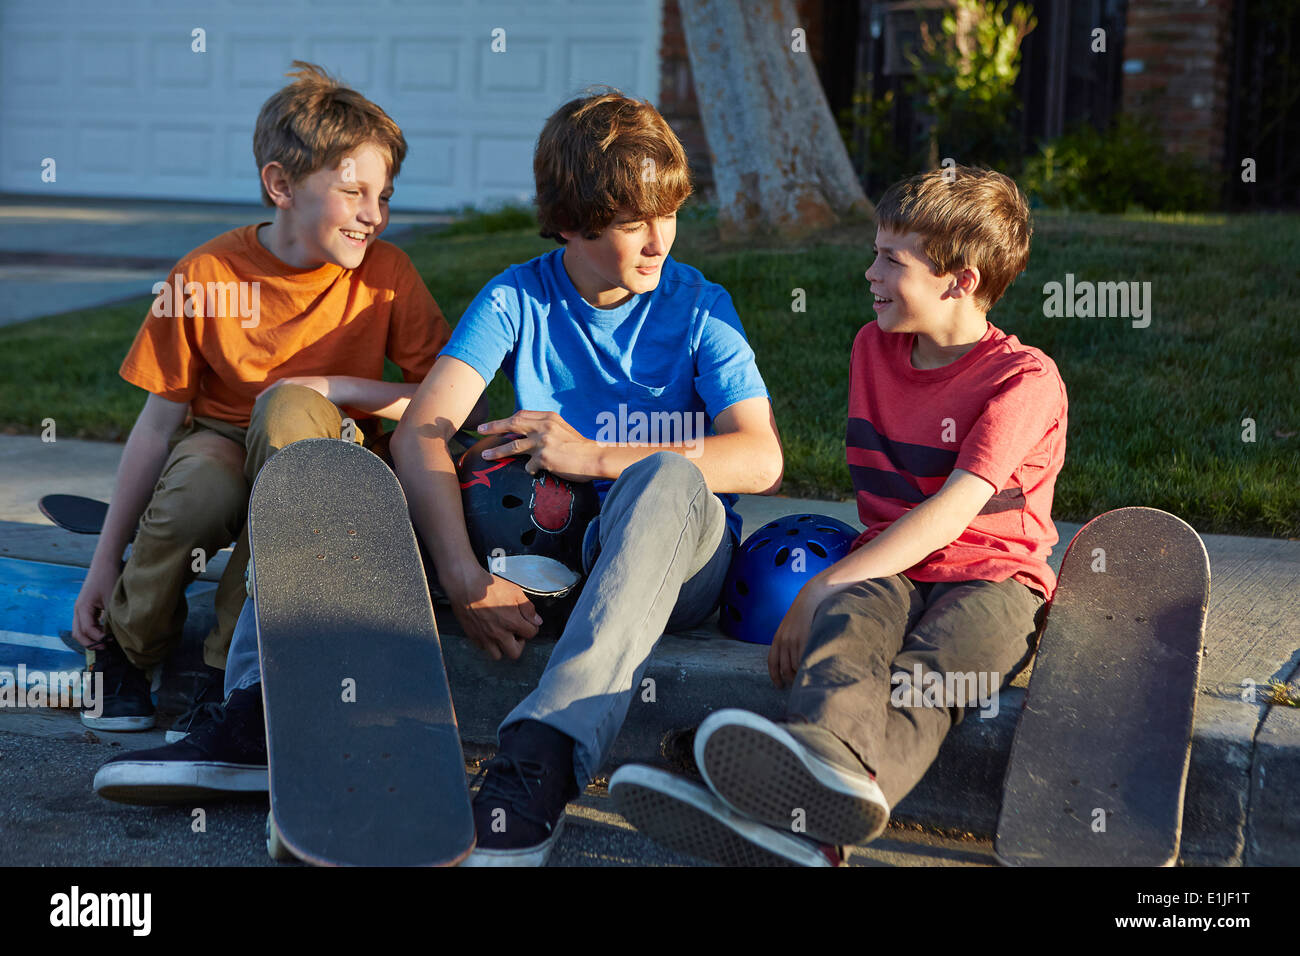 Boys sitting on pavement with skateboards Stock Photo